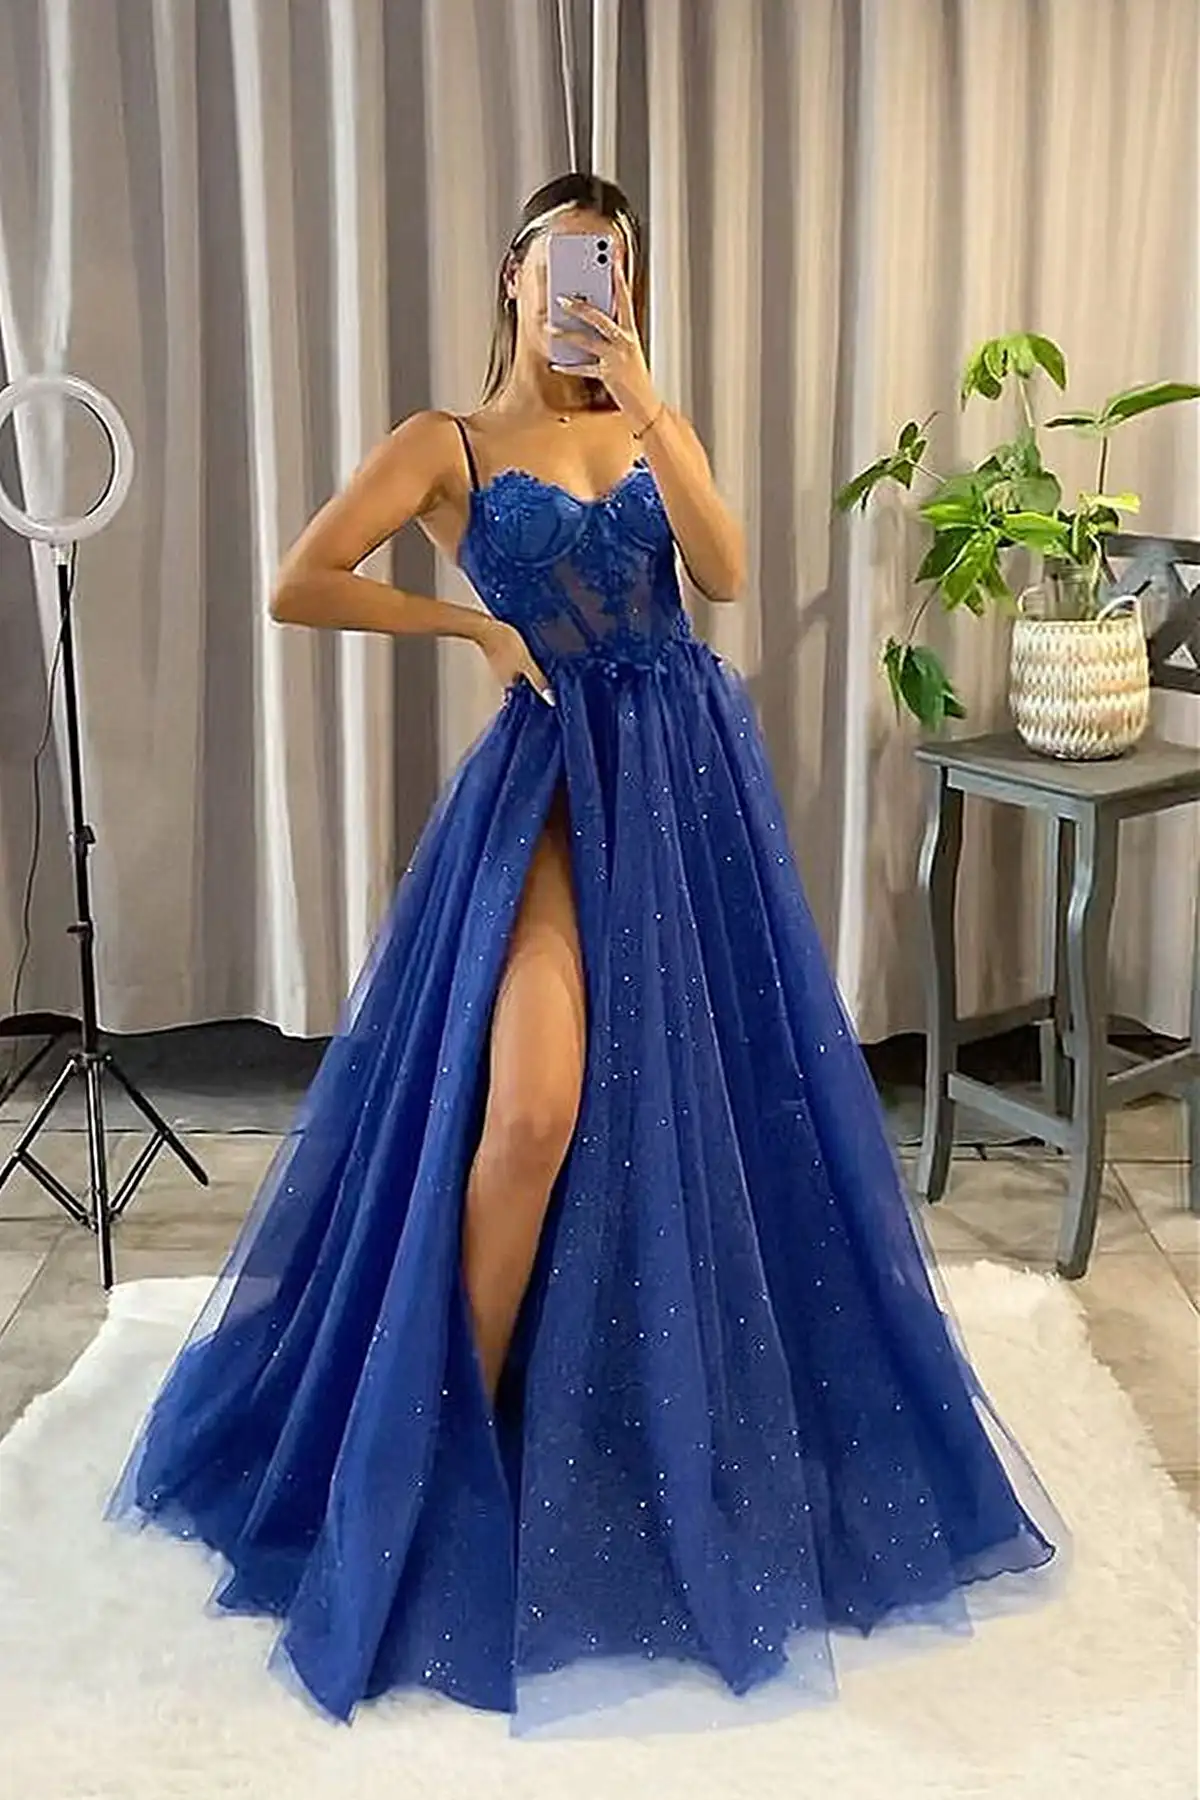 

Sparkly Glitters Tulle Evening Dresses Sparkly Spaghetti Strap Sweetheart Illusion A Line with Slit Long Prom Gowns Formal Party